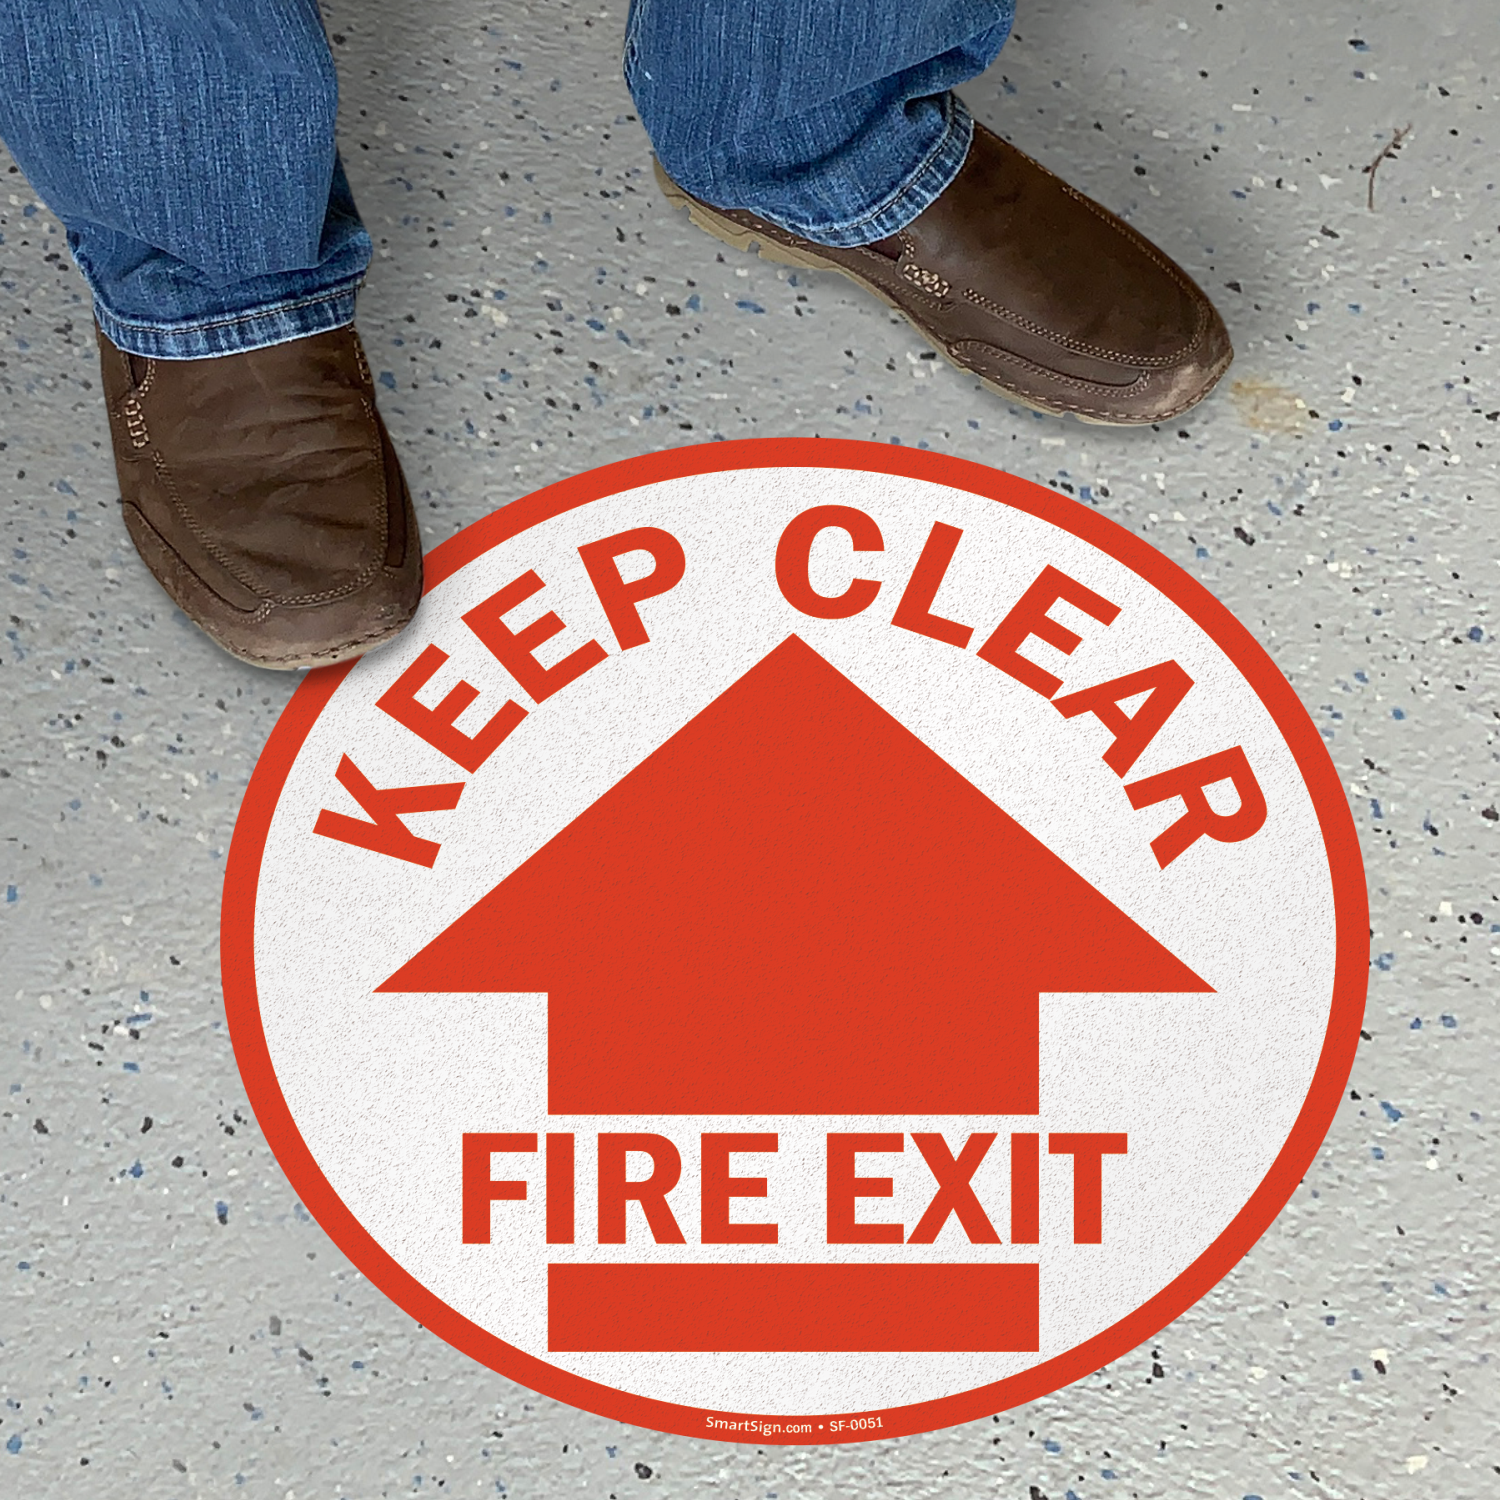 Keep in fire x in. Floor exit sign. Fire exit keep Clear. 4 Floor exit. Step away signs Floor.